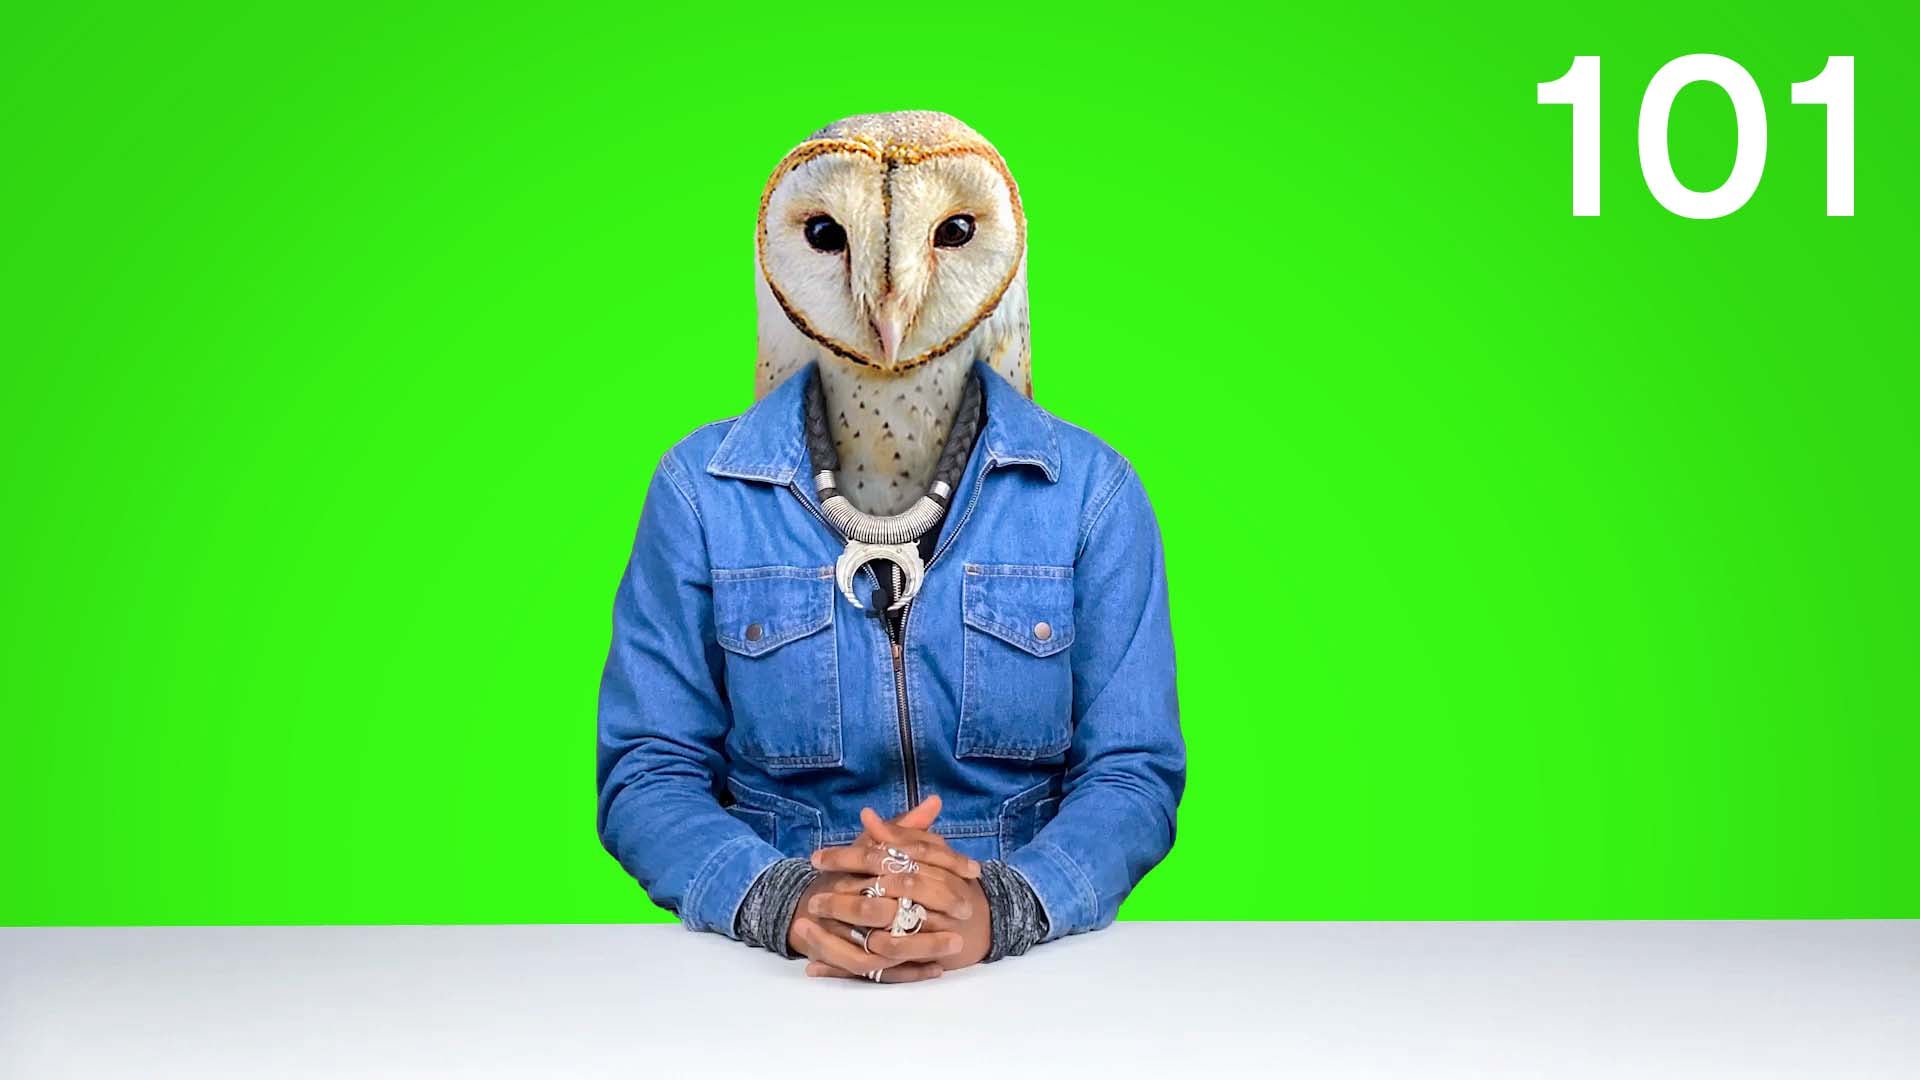 A team factorylux person with a blue denim dress and an owls head 